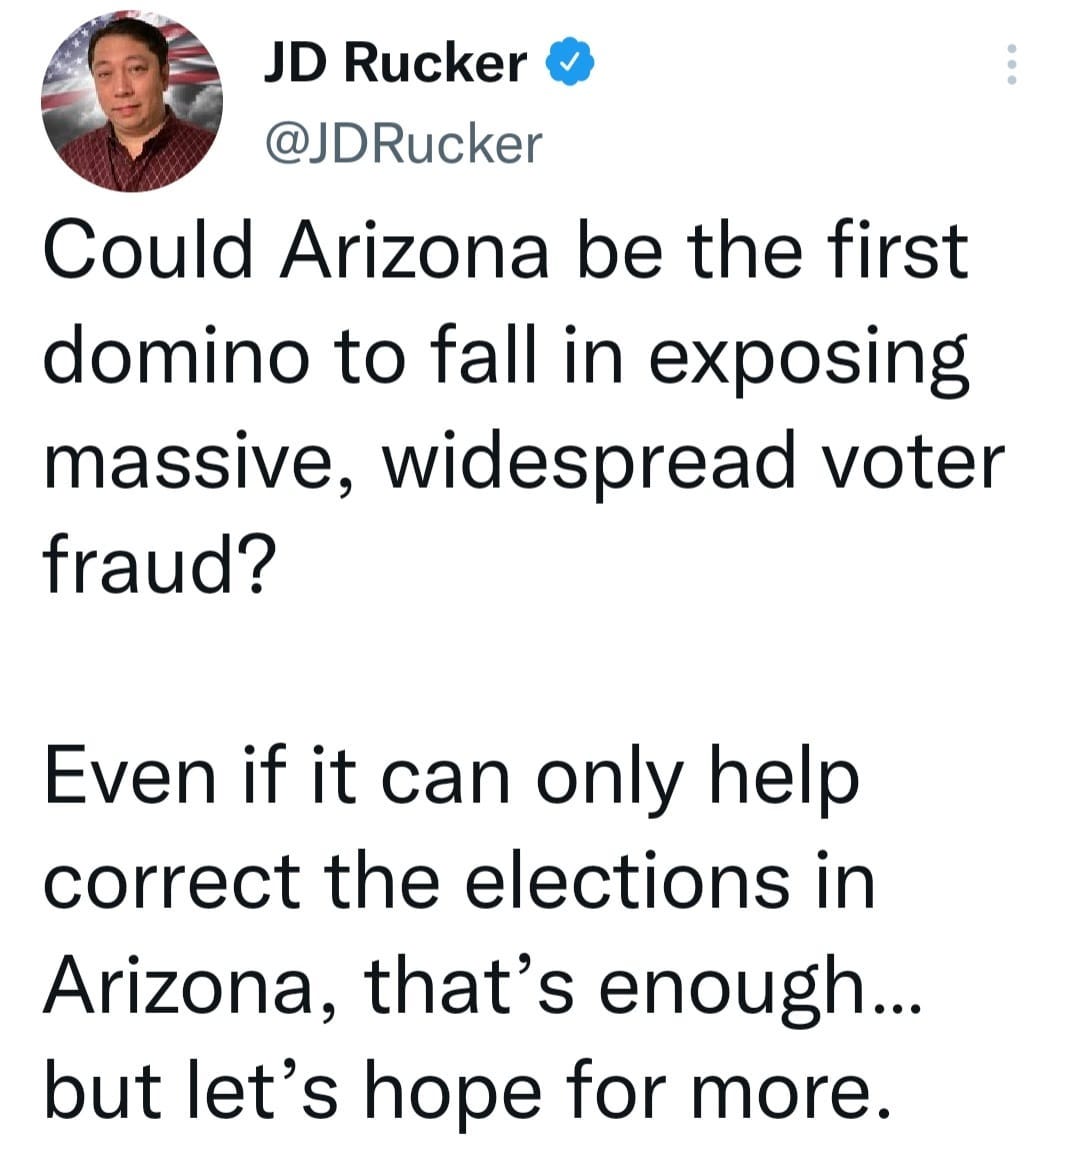 May be a Twitter screenshot of 1 person and text that says 'JD Rucker @JDRucker Could Arizona be the first domino to fall in exposing massive, widespread voter fraud? Even if it can only help correct the elections in Arizona, that's enough... but let's hope for more.'